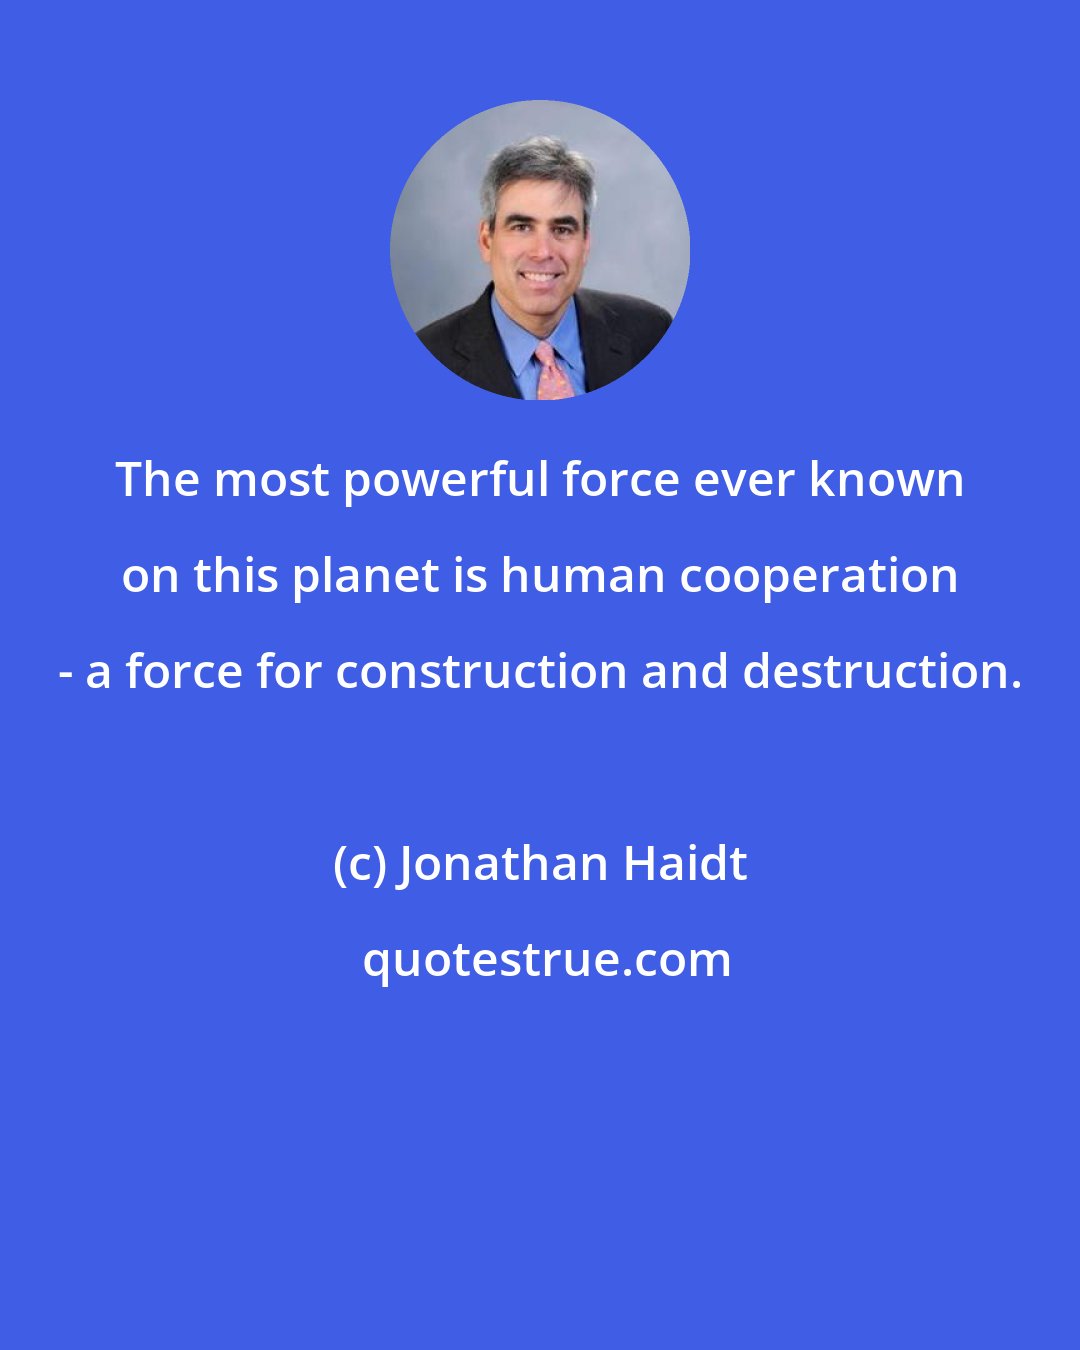 Jonathan Haidt: The most powerful force ever known on this planet is human cooperation - a force for construction and destruction.